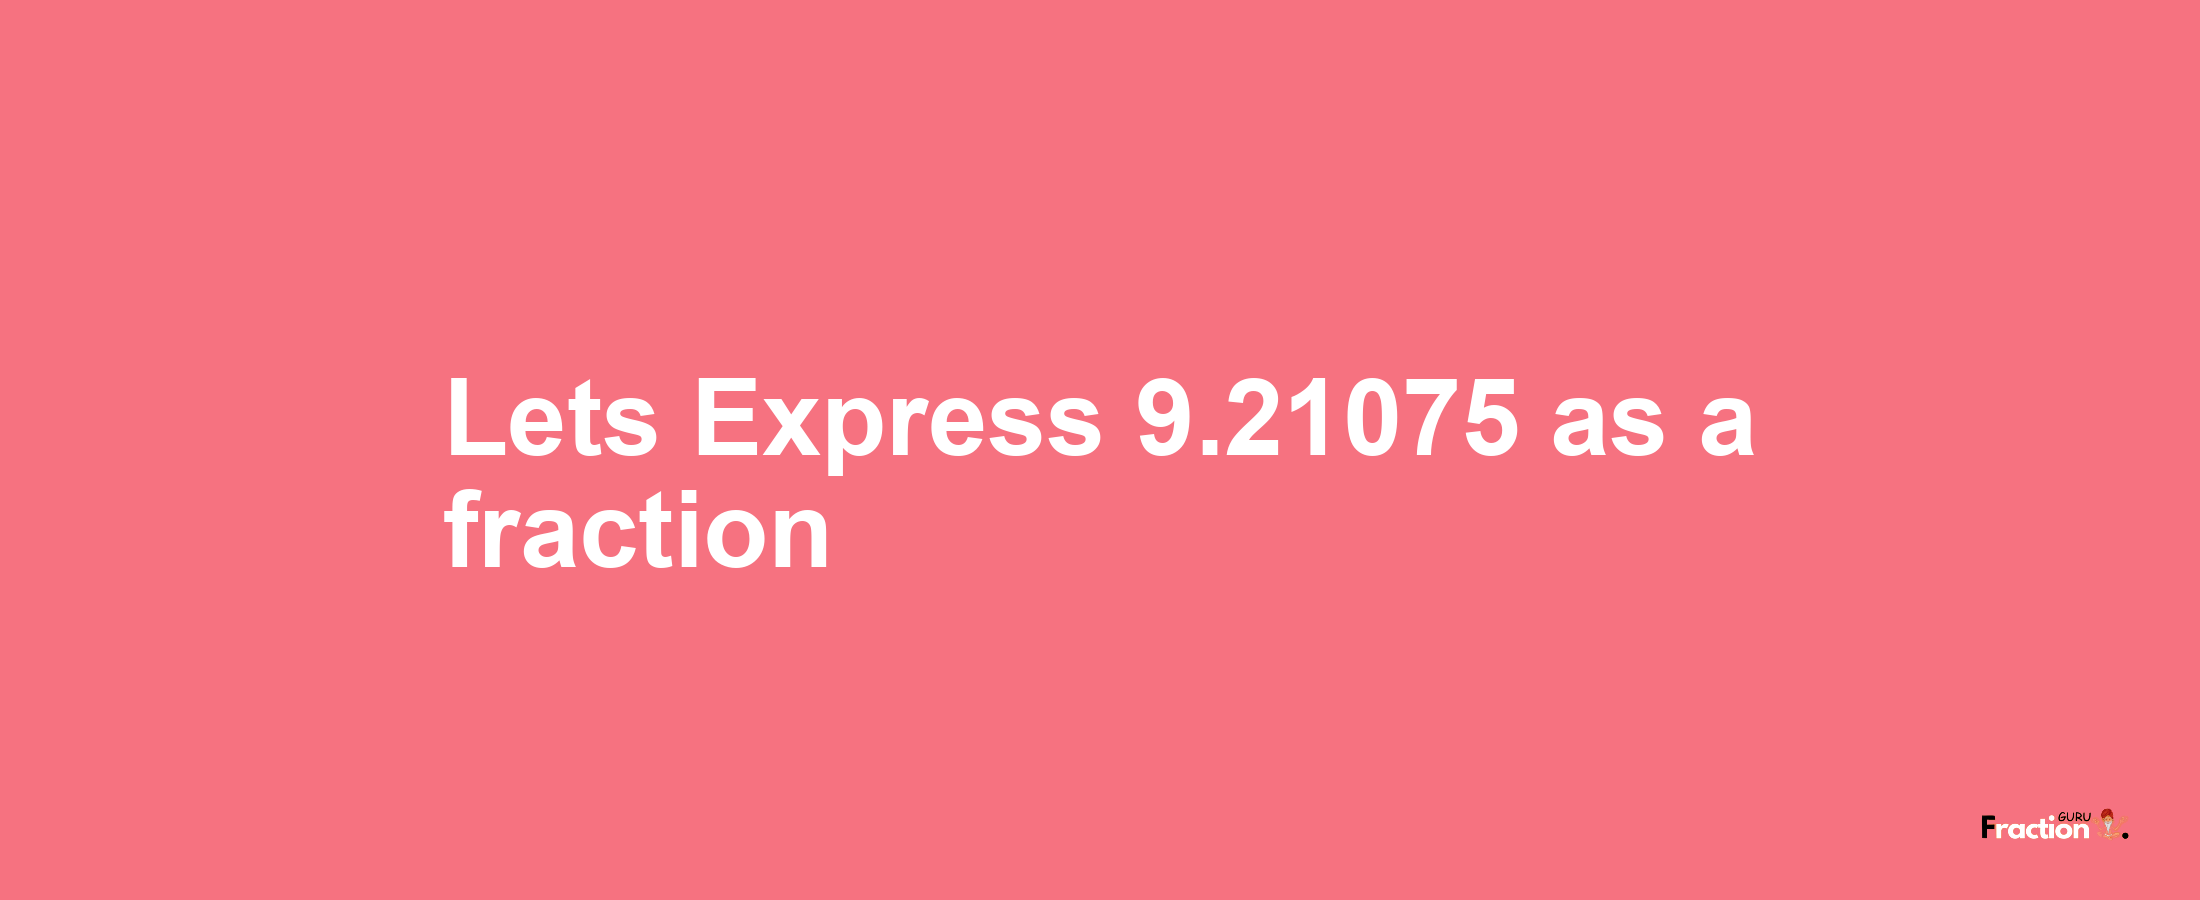 Lets Express 9.21075 as afraction